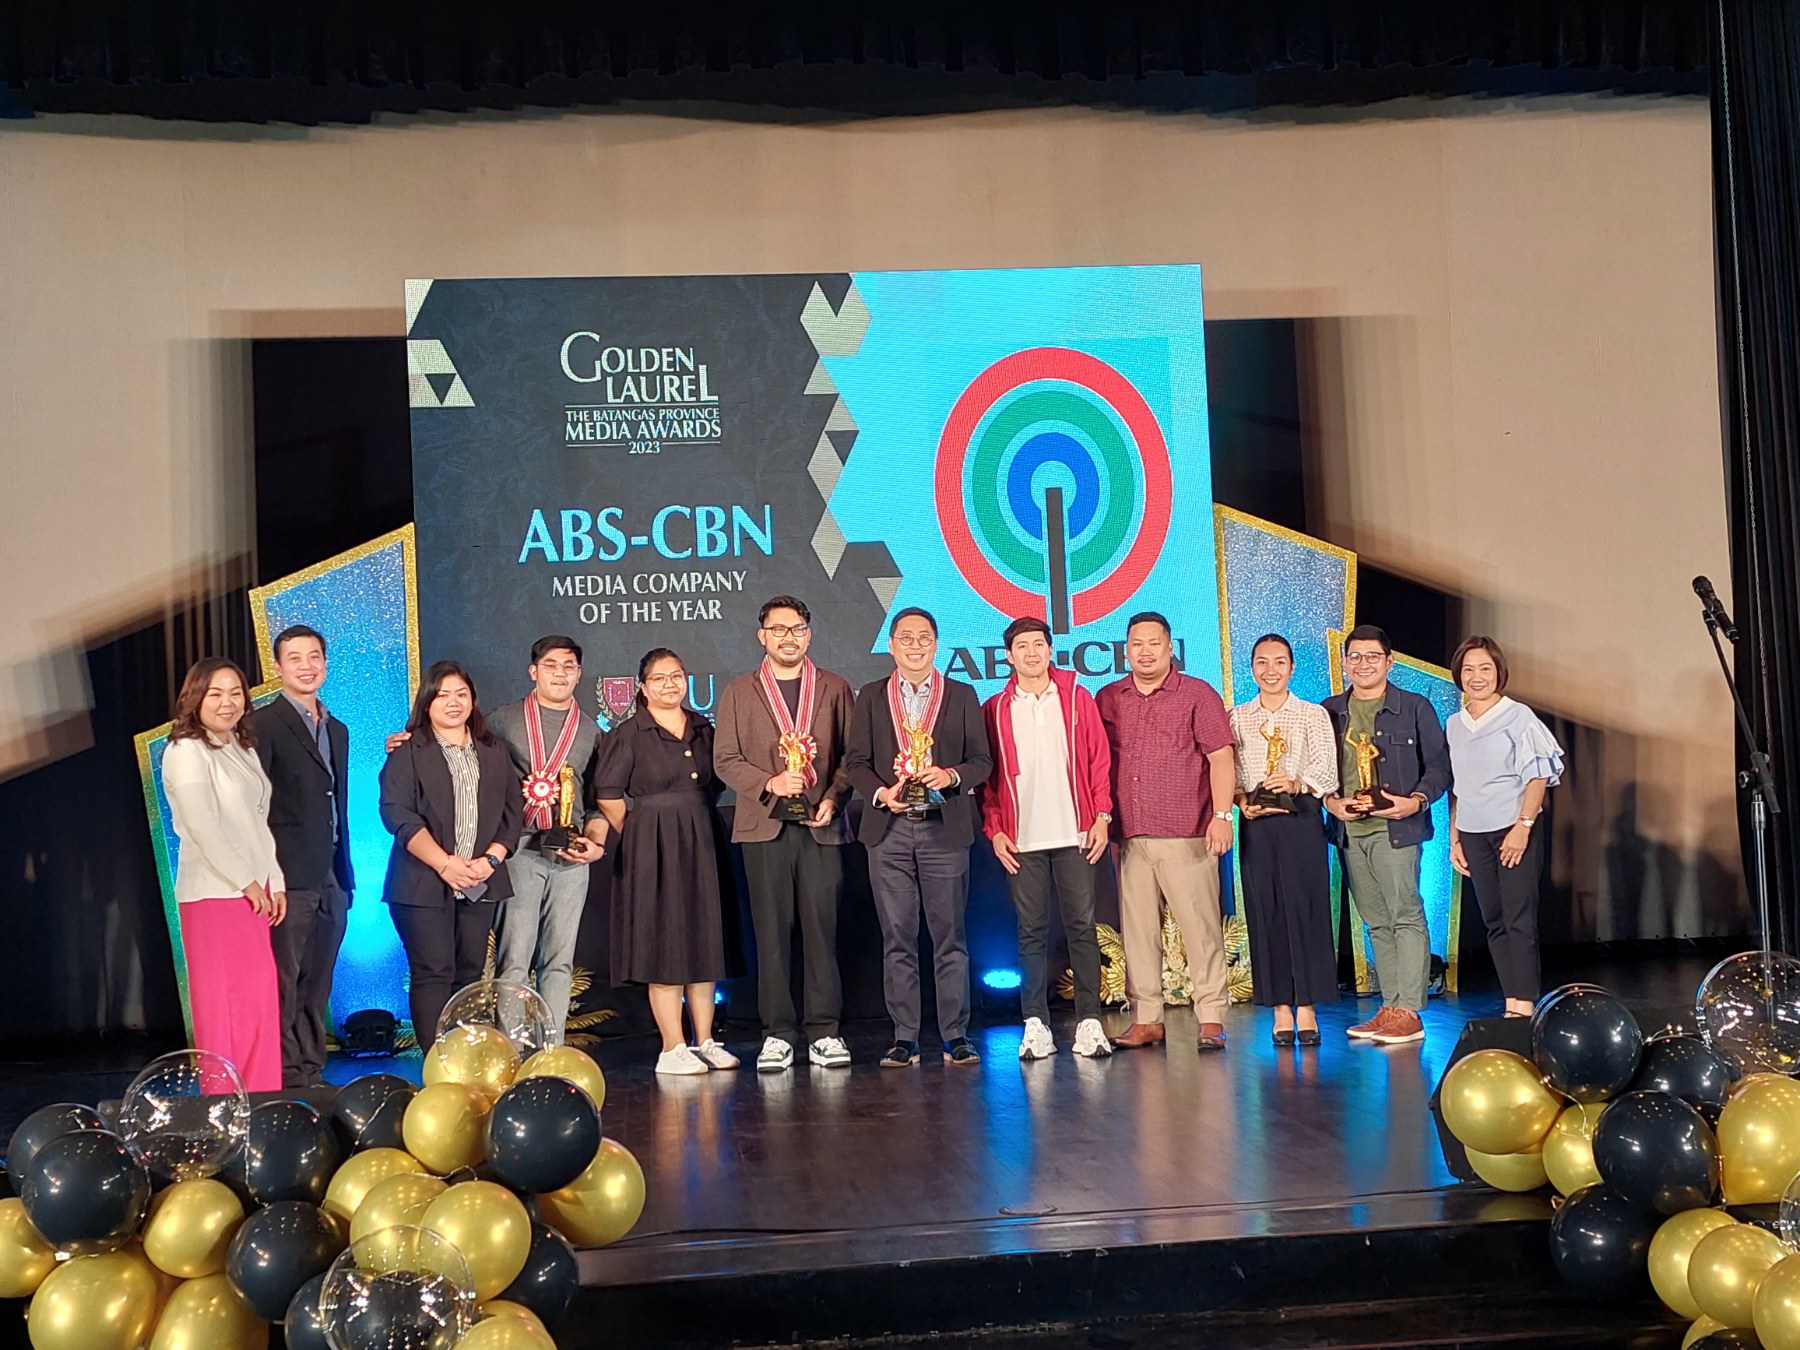 ABS CBN WINS MEDIA COMPANY OF THE YEAR AT THE GOLDEN LAUREL 2023